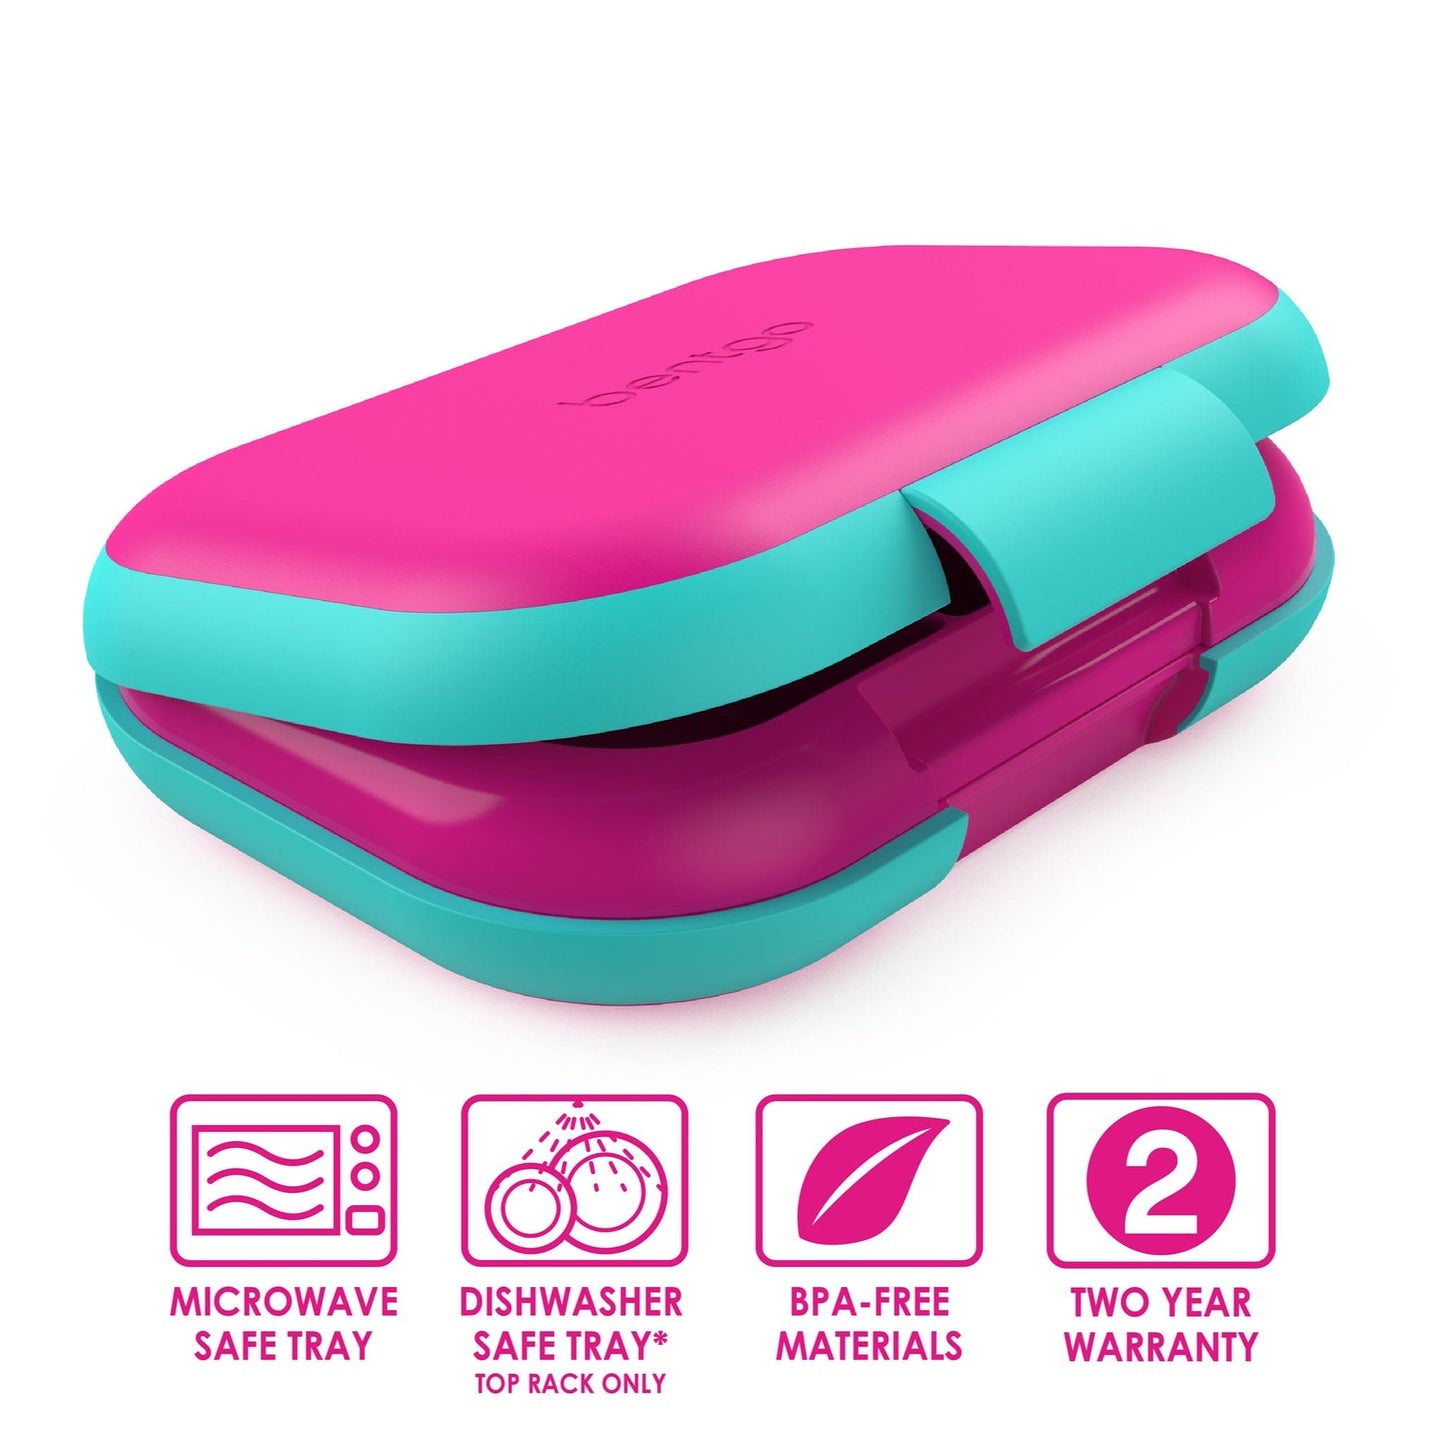 Bentgo Kids Chill Four Compartment Leakproof Lunch Box